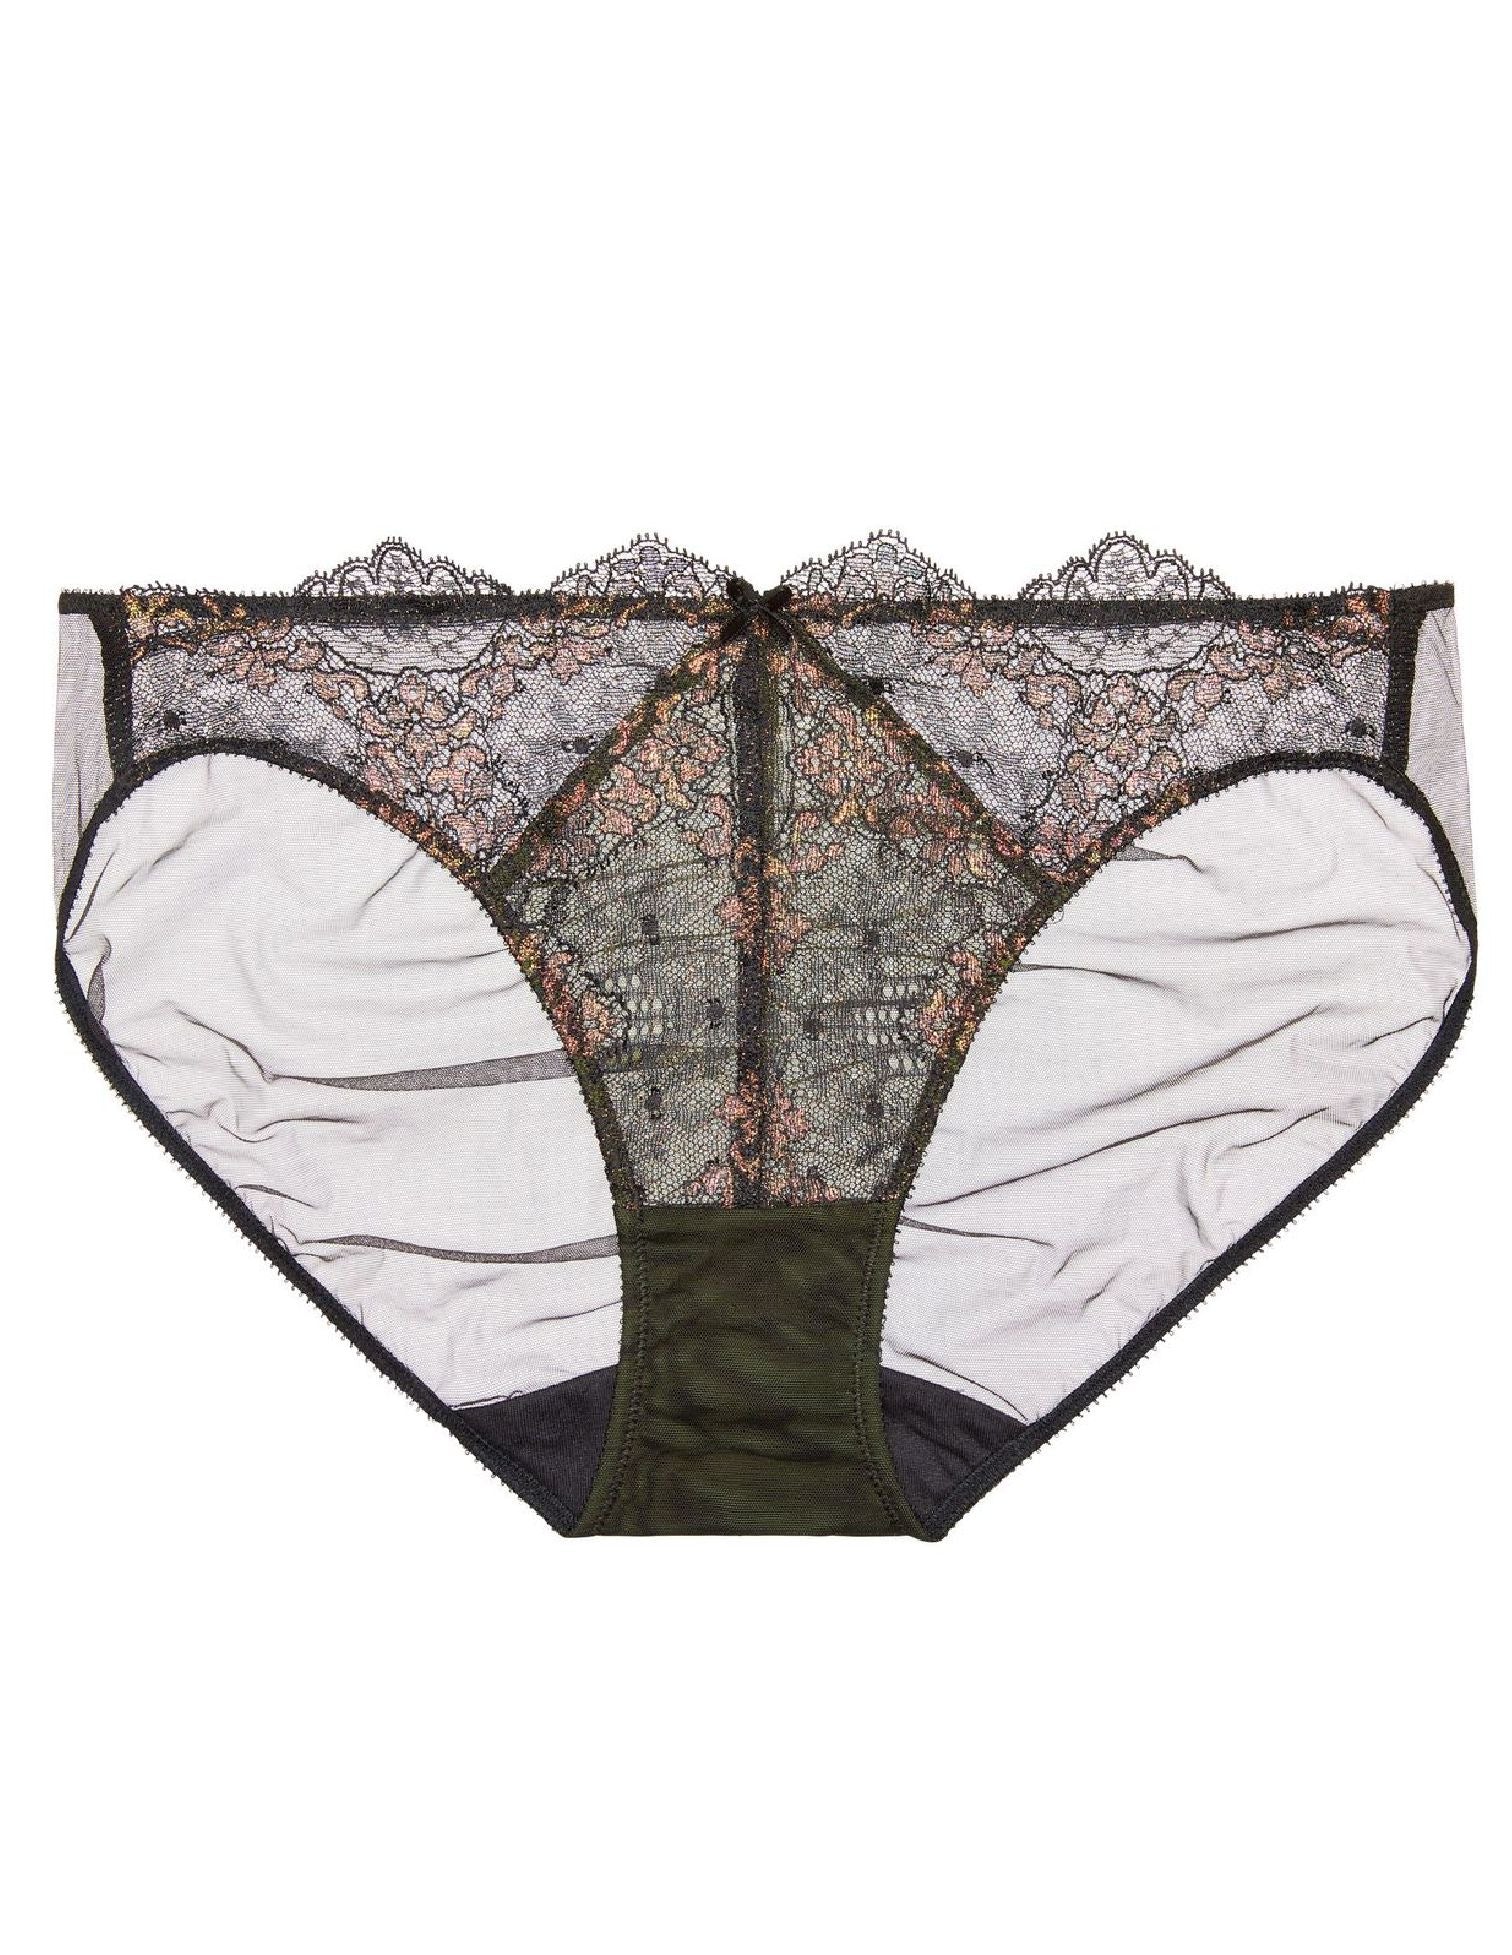 Lurex Lace  Black Irridescent Brief - Last Chance To Buy!